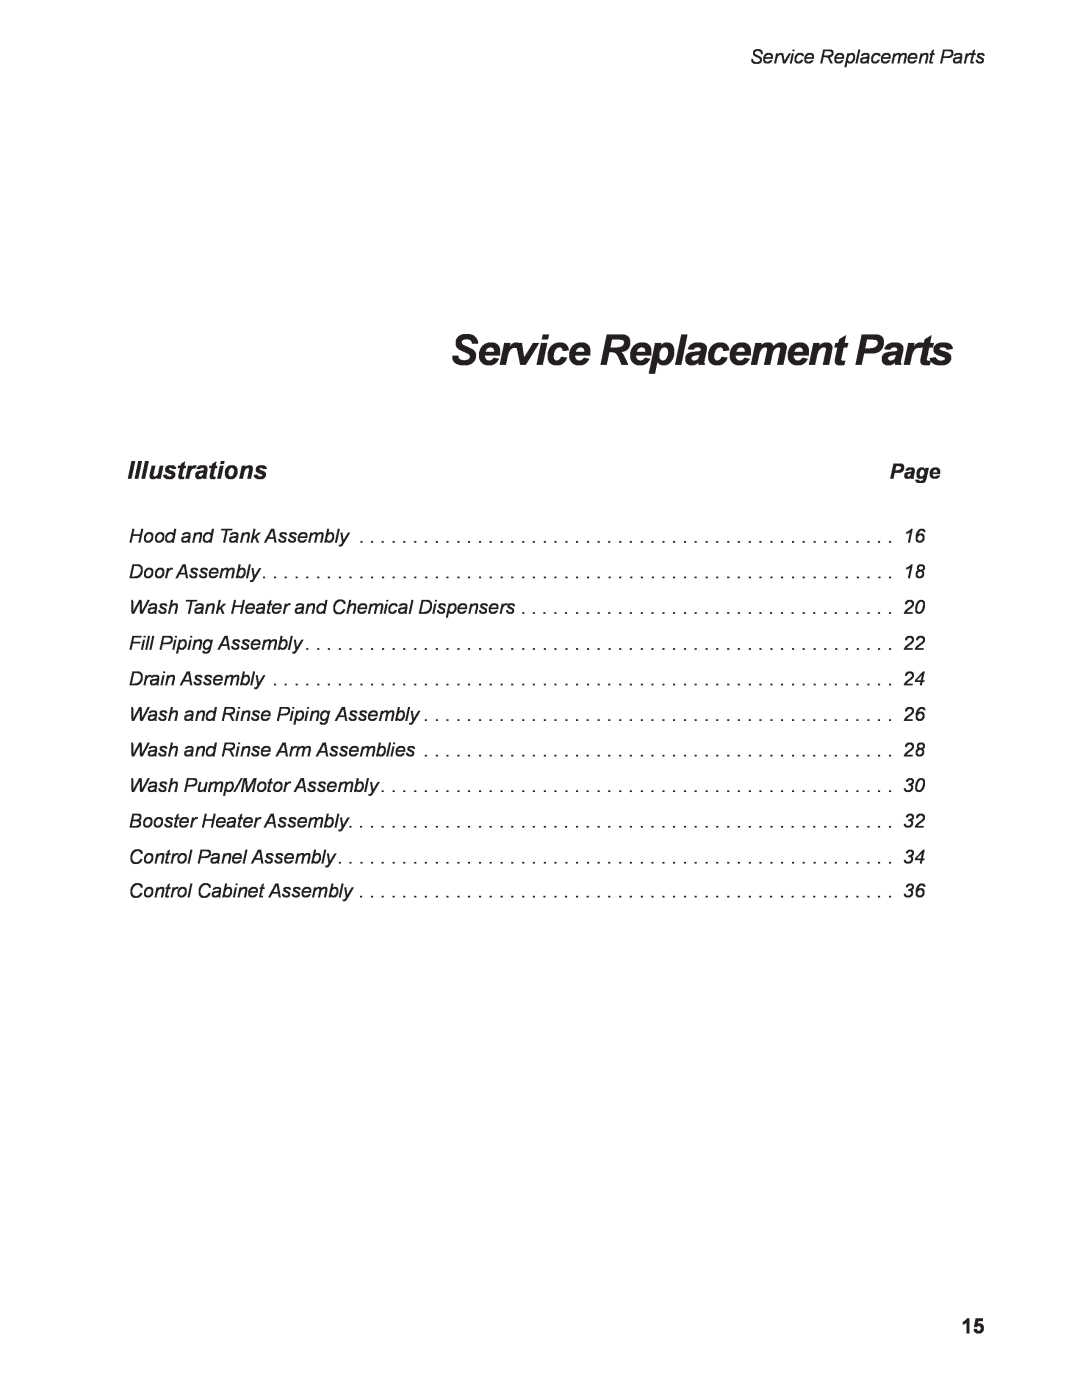 Moyer Diebel 301HT M2 installation manual Service Replacement Parts, Illustrations, Page 